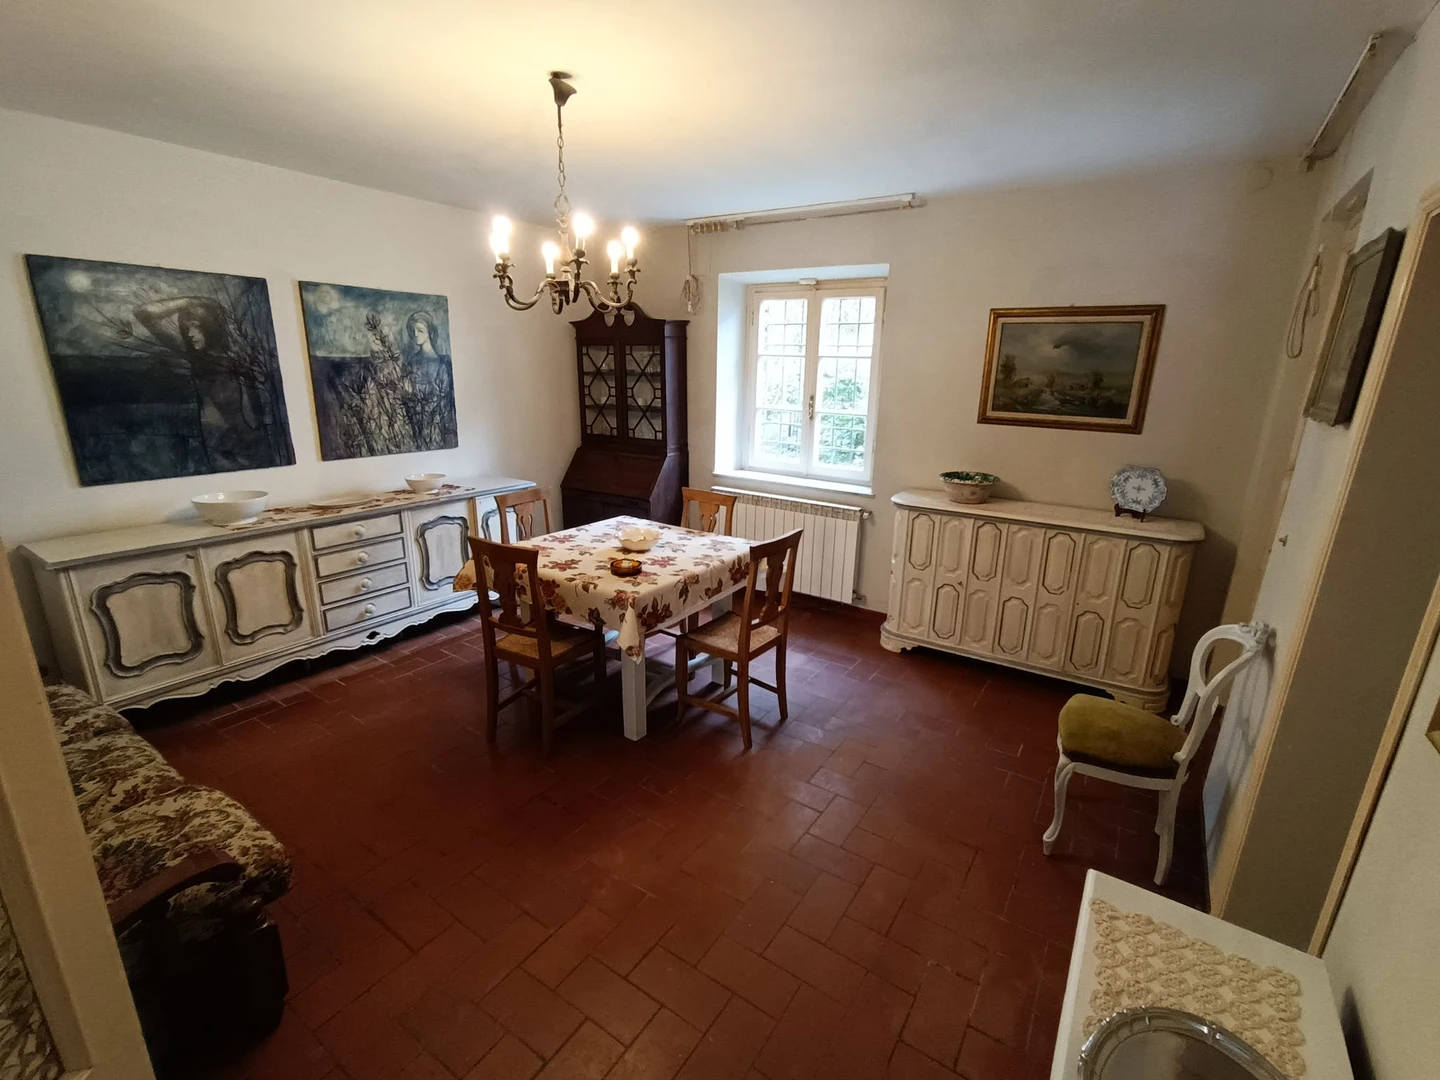 Room for rent in a shared flat in lucca